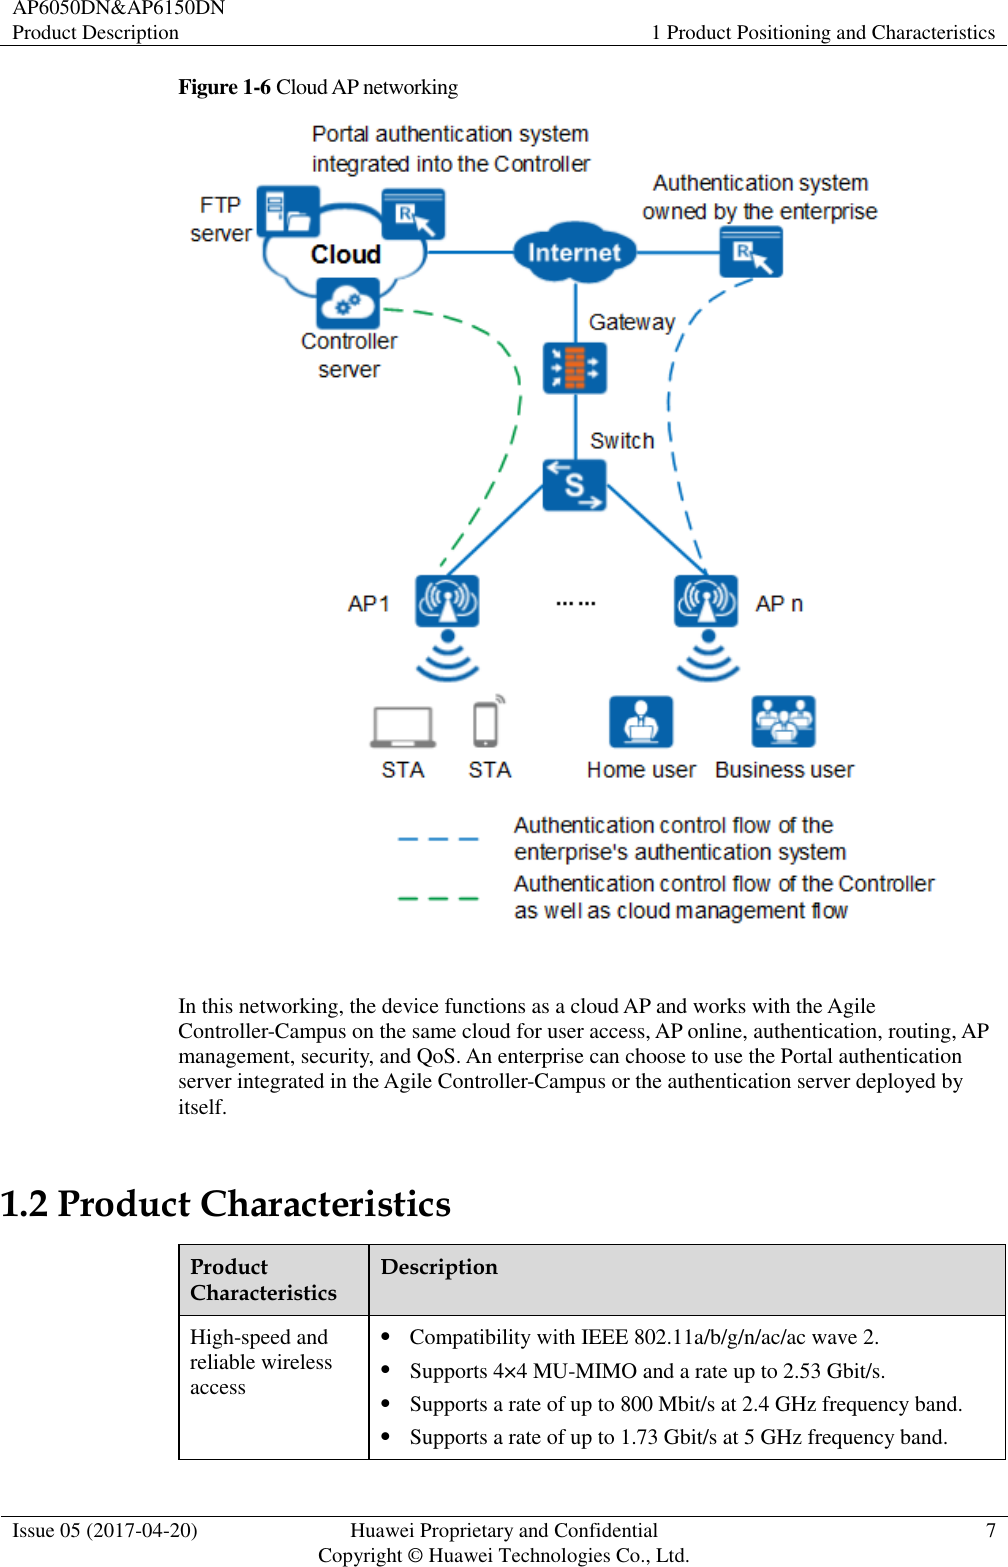 AP6050DN&amp;AP6150DN Product Description 1 Product Positioning and Characteristics  Issue 05 (2017-04-20) Huawei Proprietary and Confidential                                     Copyright © Huawei Technologies Co., Ltd. 7  Figure 1-6 Cloud AP networking   In this networking, the device functions as a cloud AP and works with the Agile Controller-Campus on the same cloud for user access, AP online, authentication, routing, AP management, security, and QoS. An enterprise can choose to use the Portal authentication server integrated in the Agile Controller-Campus or the authentication server deployed by itself. 1.2 Product Characteristics Product Characteristics Description High-speed and reliable wireless access  Compatibility with IEEE 802.11a/b/g/n/ac/ac wave 2.  Supports 4×4 MU-MIMO and a rate up to 2.53 Gbit/s.  Supports a rate of up to 800 Mbit/s at 2.4 GHz frequency band.  Supports a rate of up to 1.73 Gbit/s at 5 GHz frequency band. 